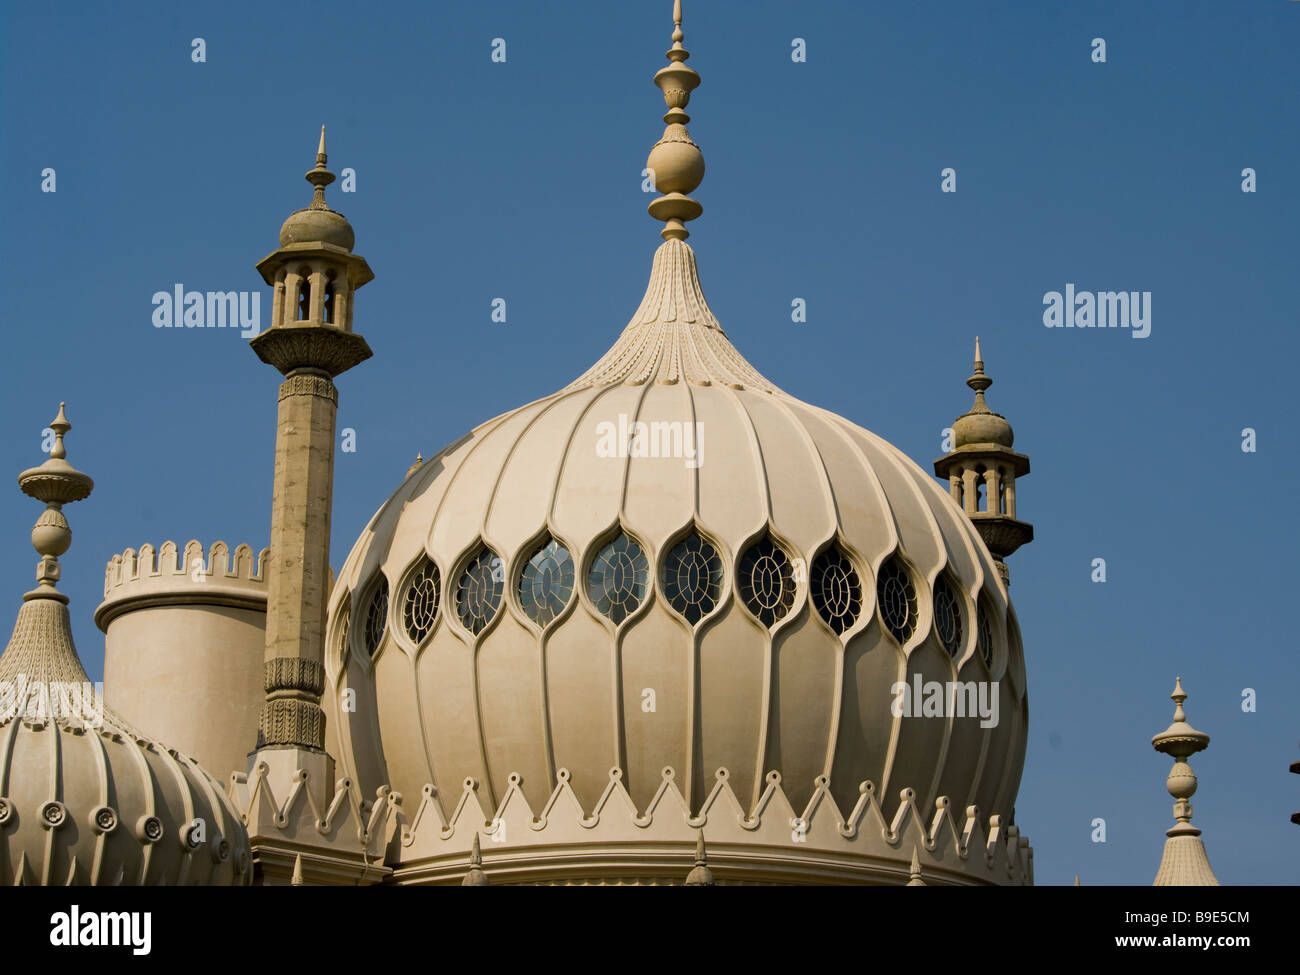 Ornate Domes Of The Royal Brighton Pavilion East Sussex England Stock Photo